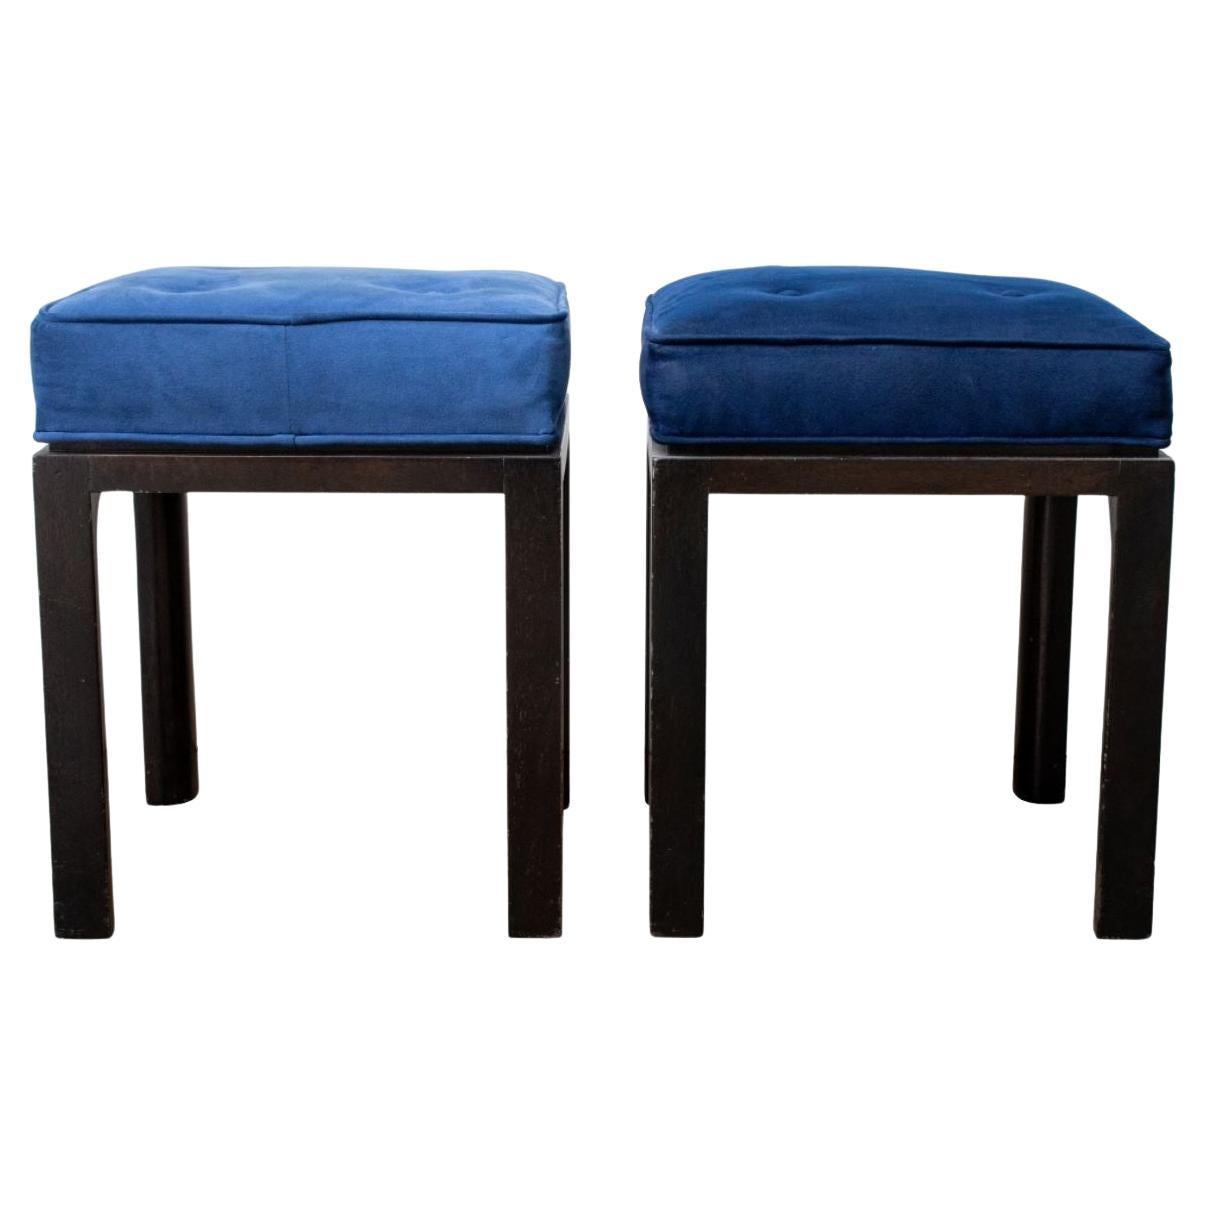 Mid-Century Blue Suede Upholstered Stools, Pair For Sale